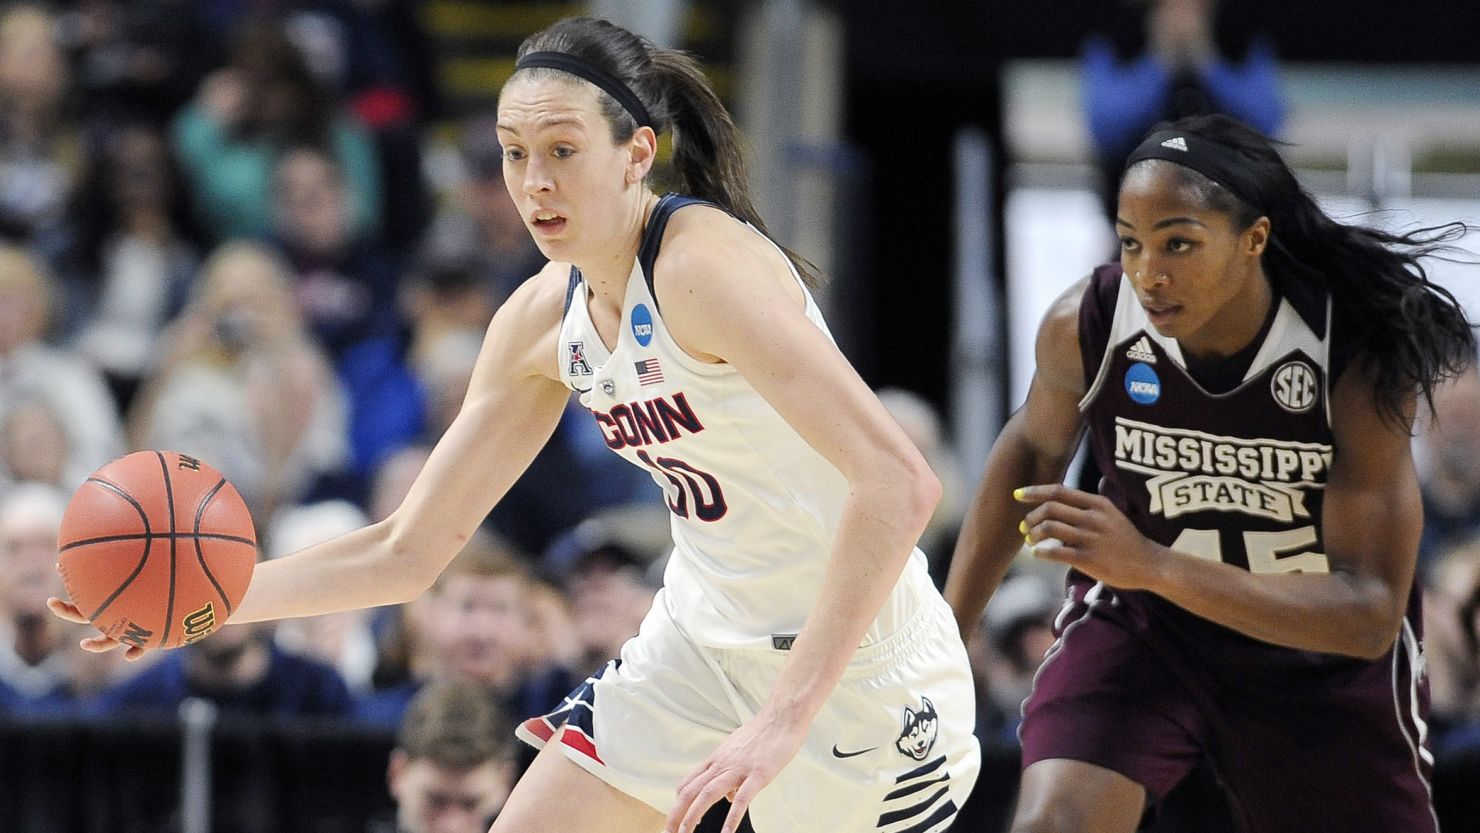 Breanna Stewart, left, had 22 points, 14 rebounds and five blocked shots in No. 1 Connecticut's rout of No. 5 Mississippi State in the regional semifinals of the women's NCAA Tournament in Bridgeport, Connecticut.